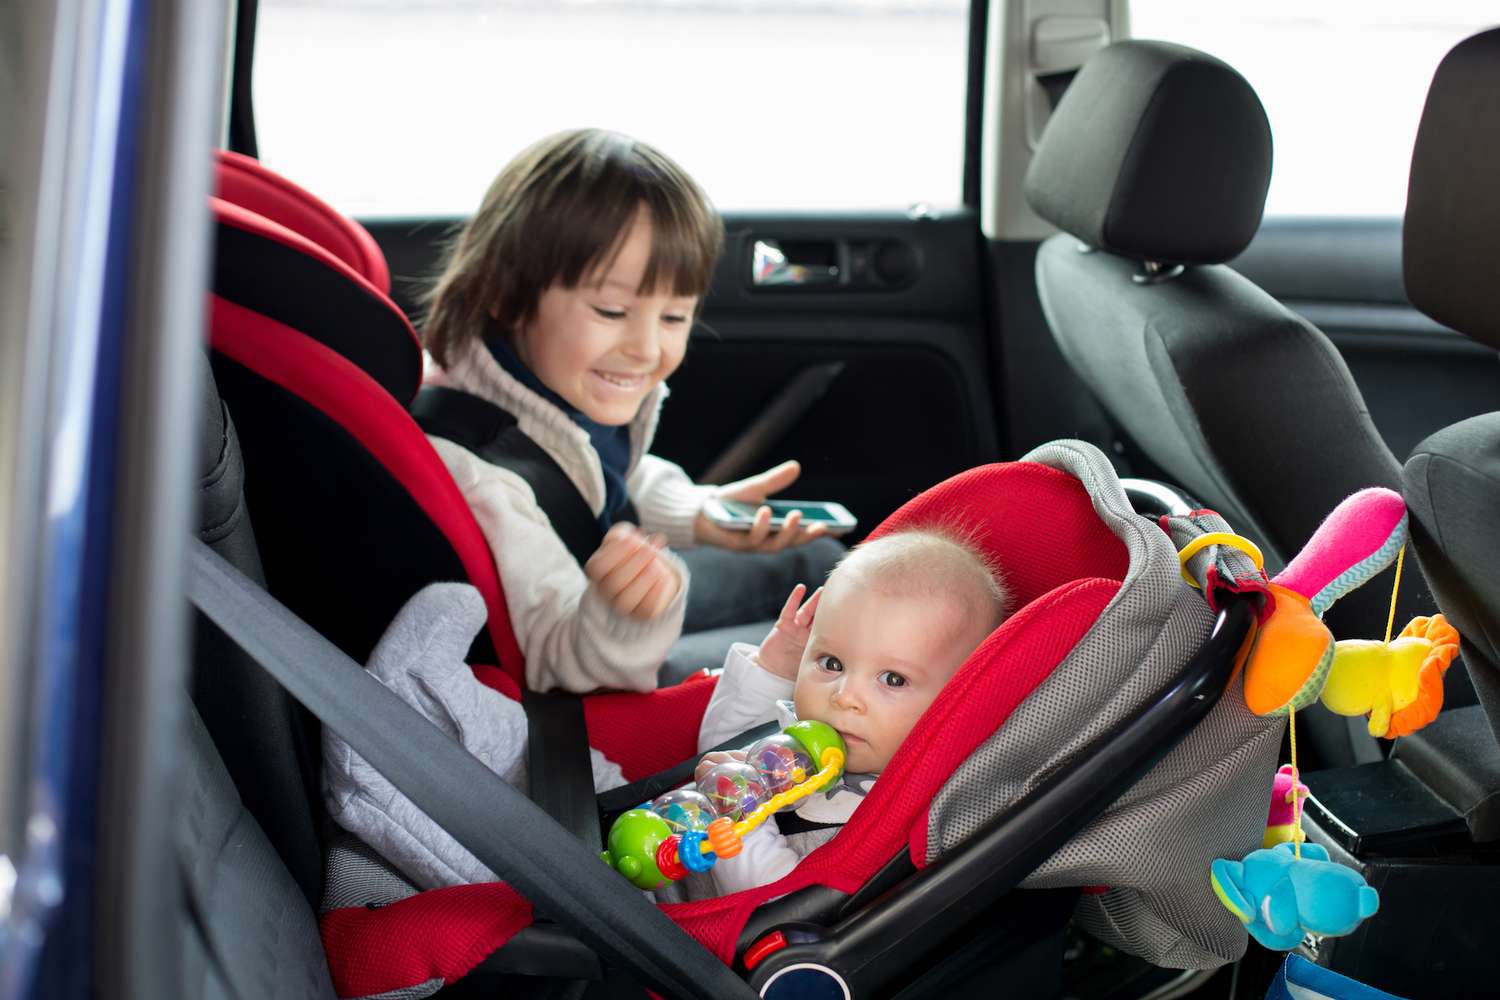 Car Seat For Your Child, What Car Seat Is Appropriate For A 5 Year Old